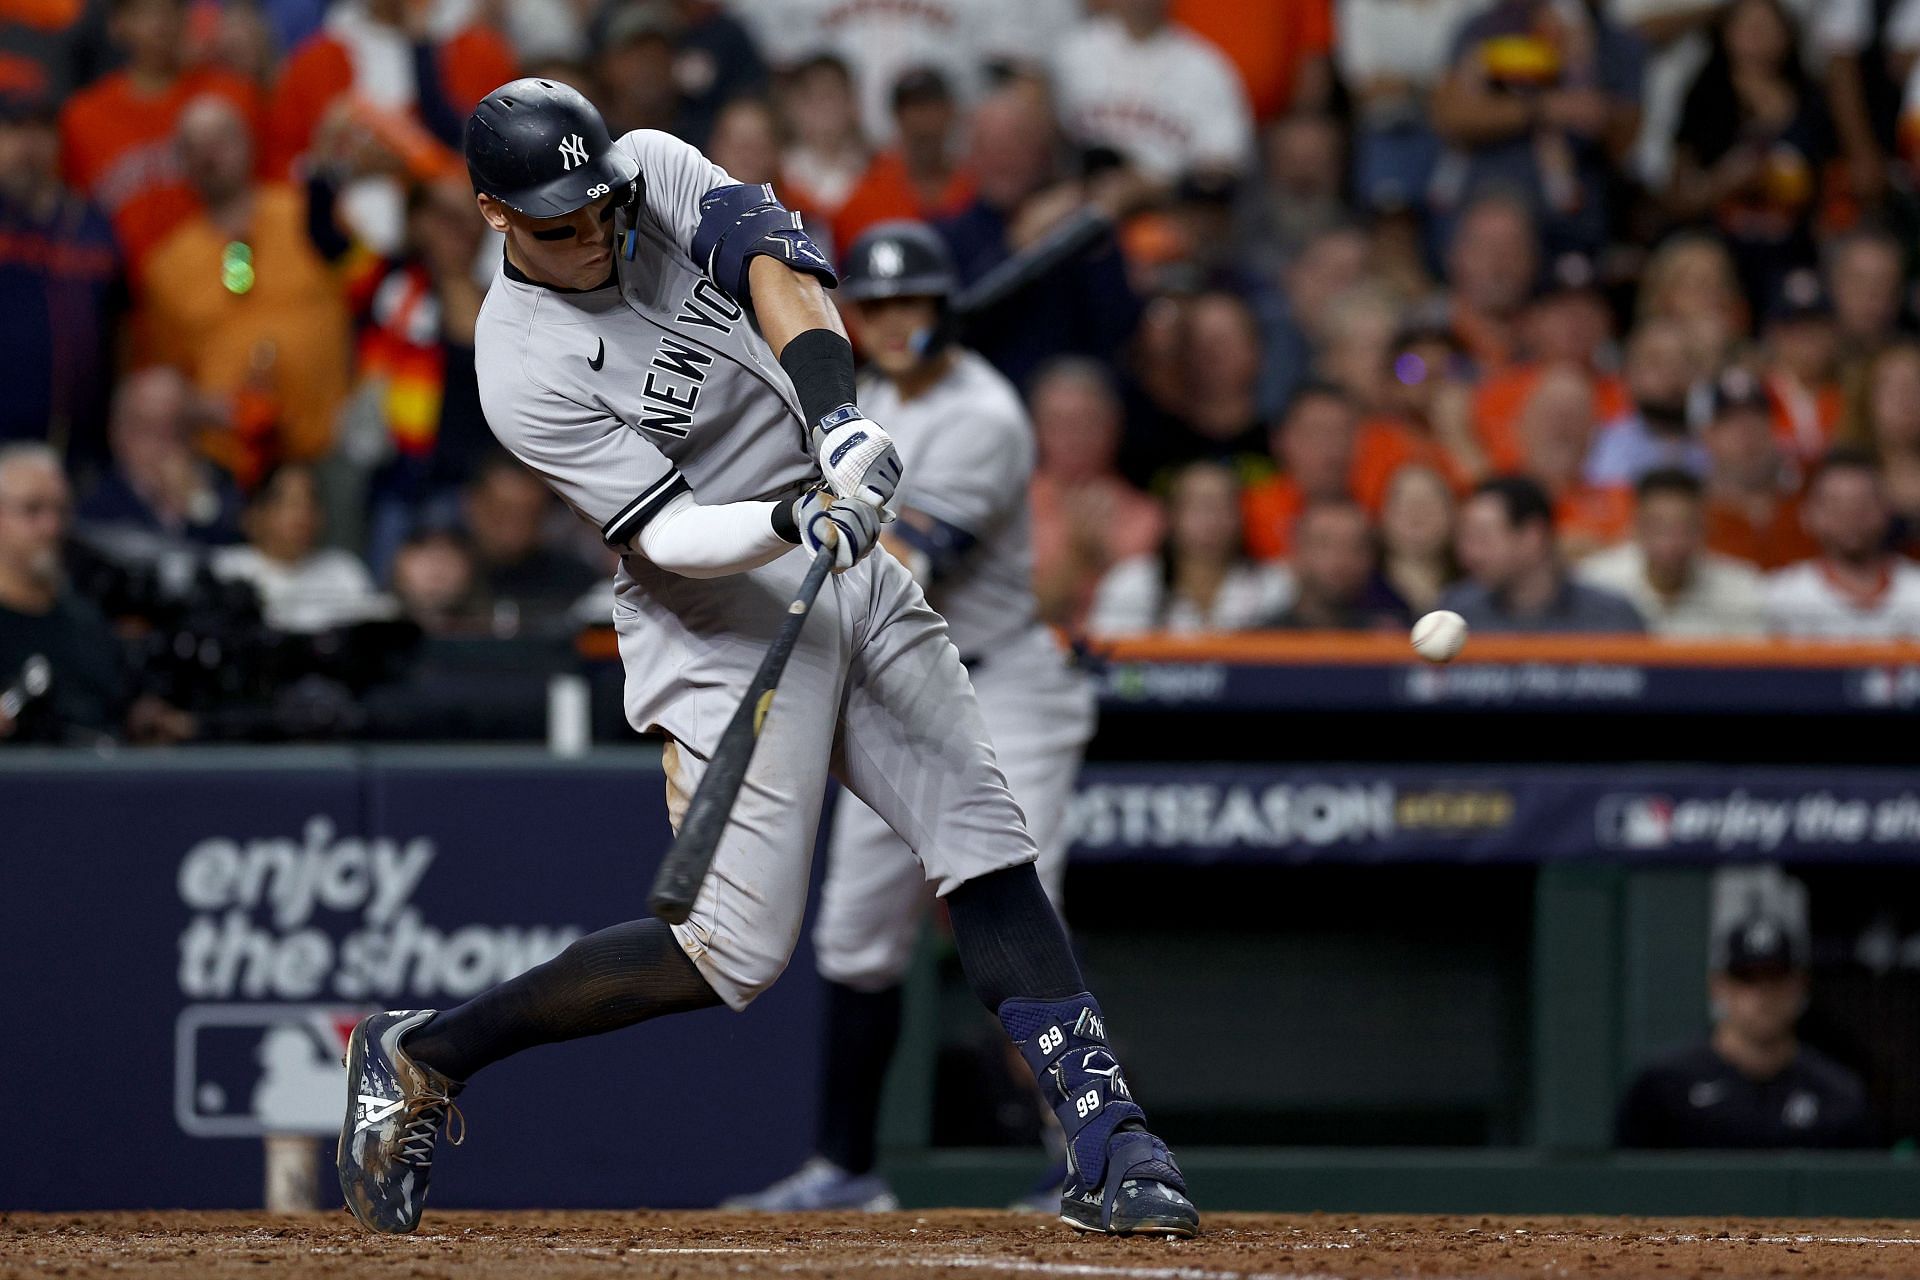 Aaron Judge hits a fly out against the Houston Astros in game two of the ALCS